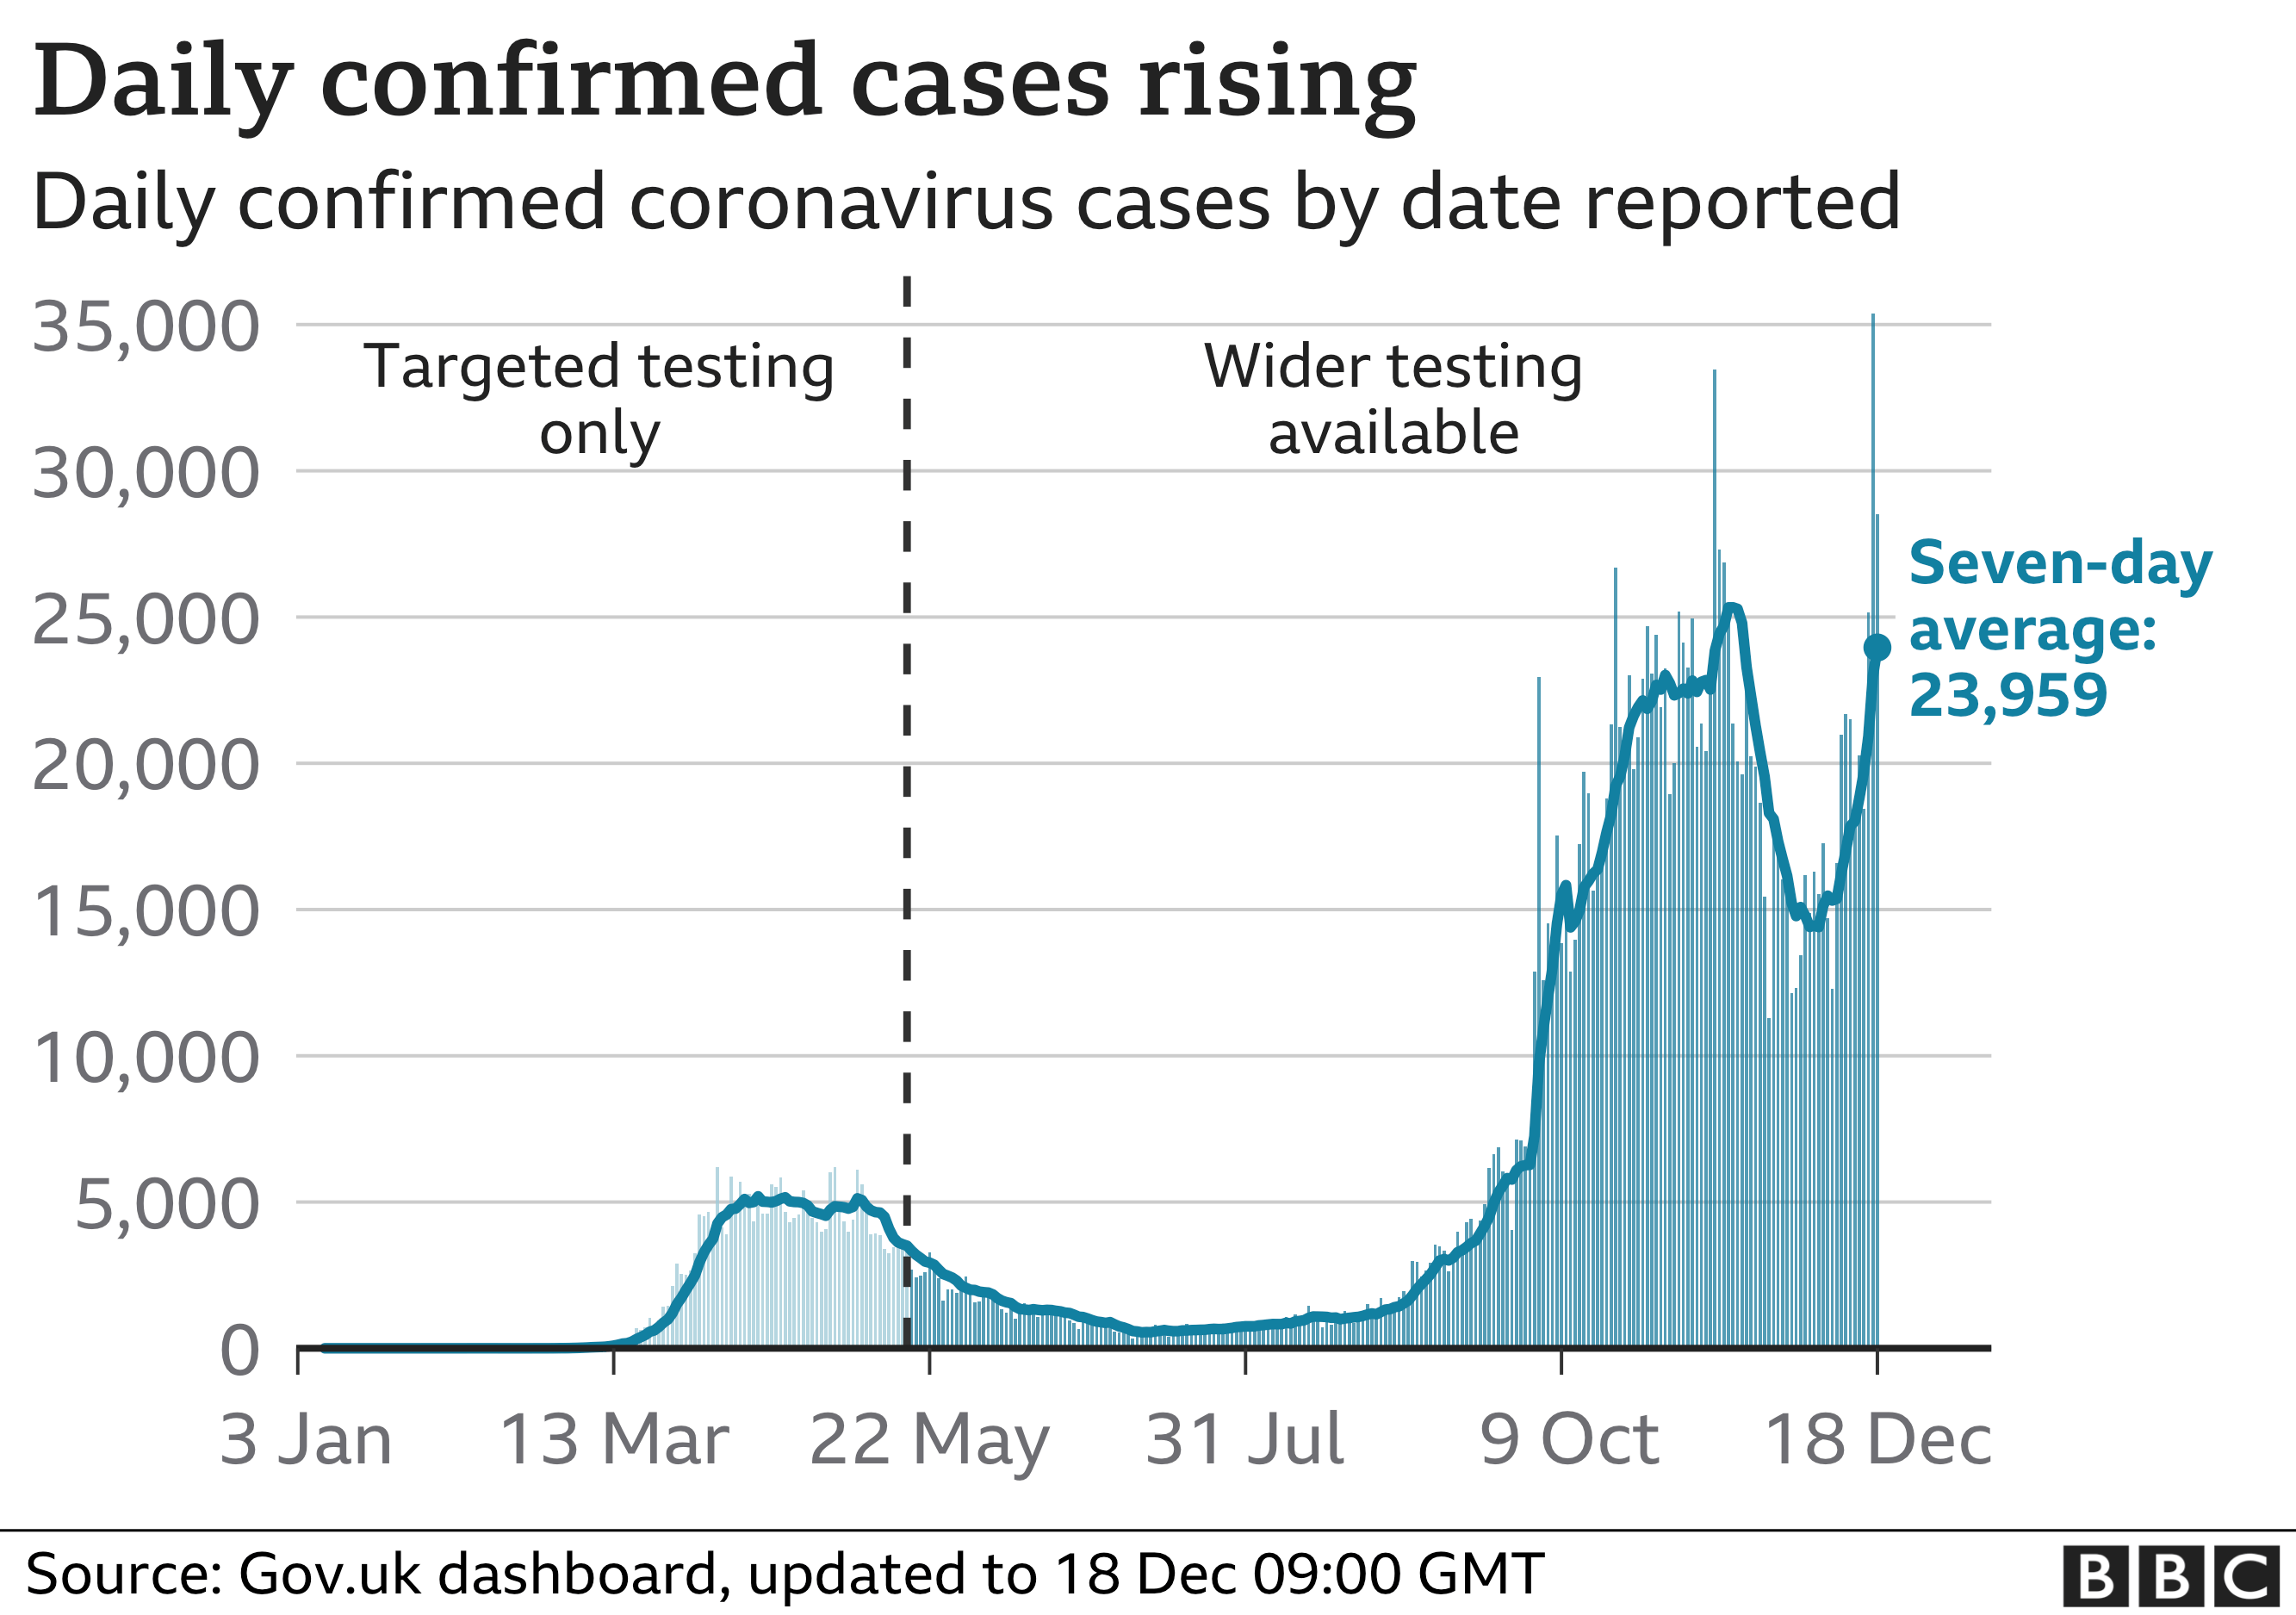 Graph showing daily confirmed cases rising in the UK